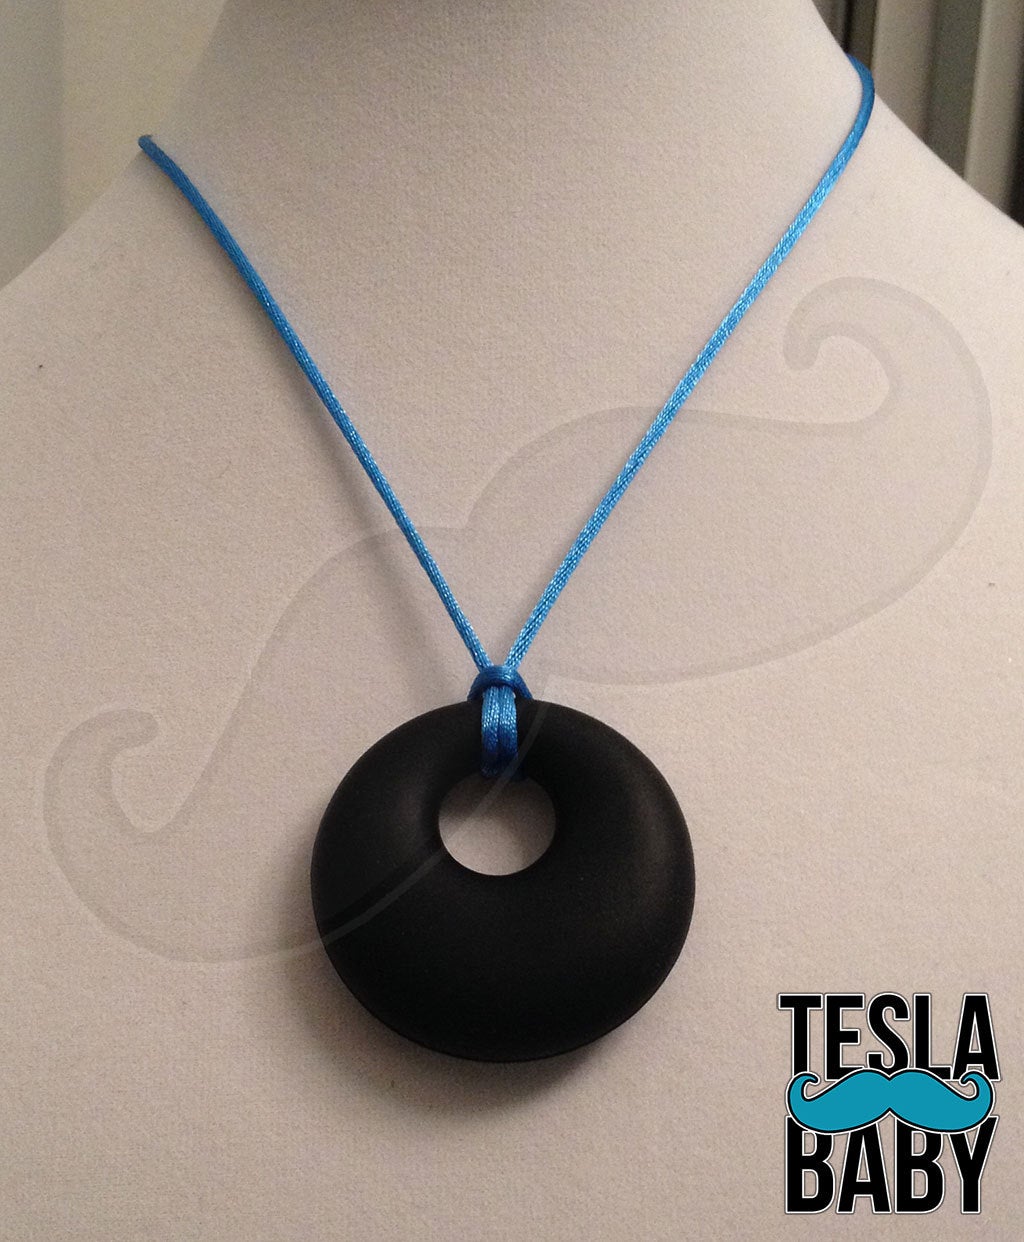 Silicone Pendant Necklace --  A 2 1/8" pink silicone circular pendant; for fidgeting, sensory play, or teething.